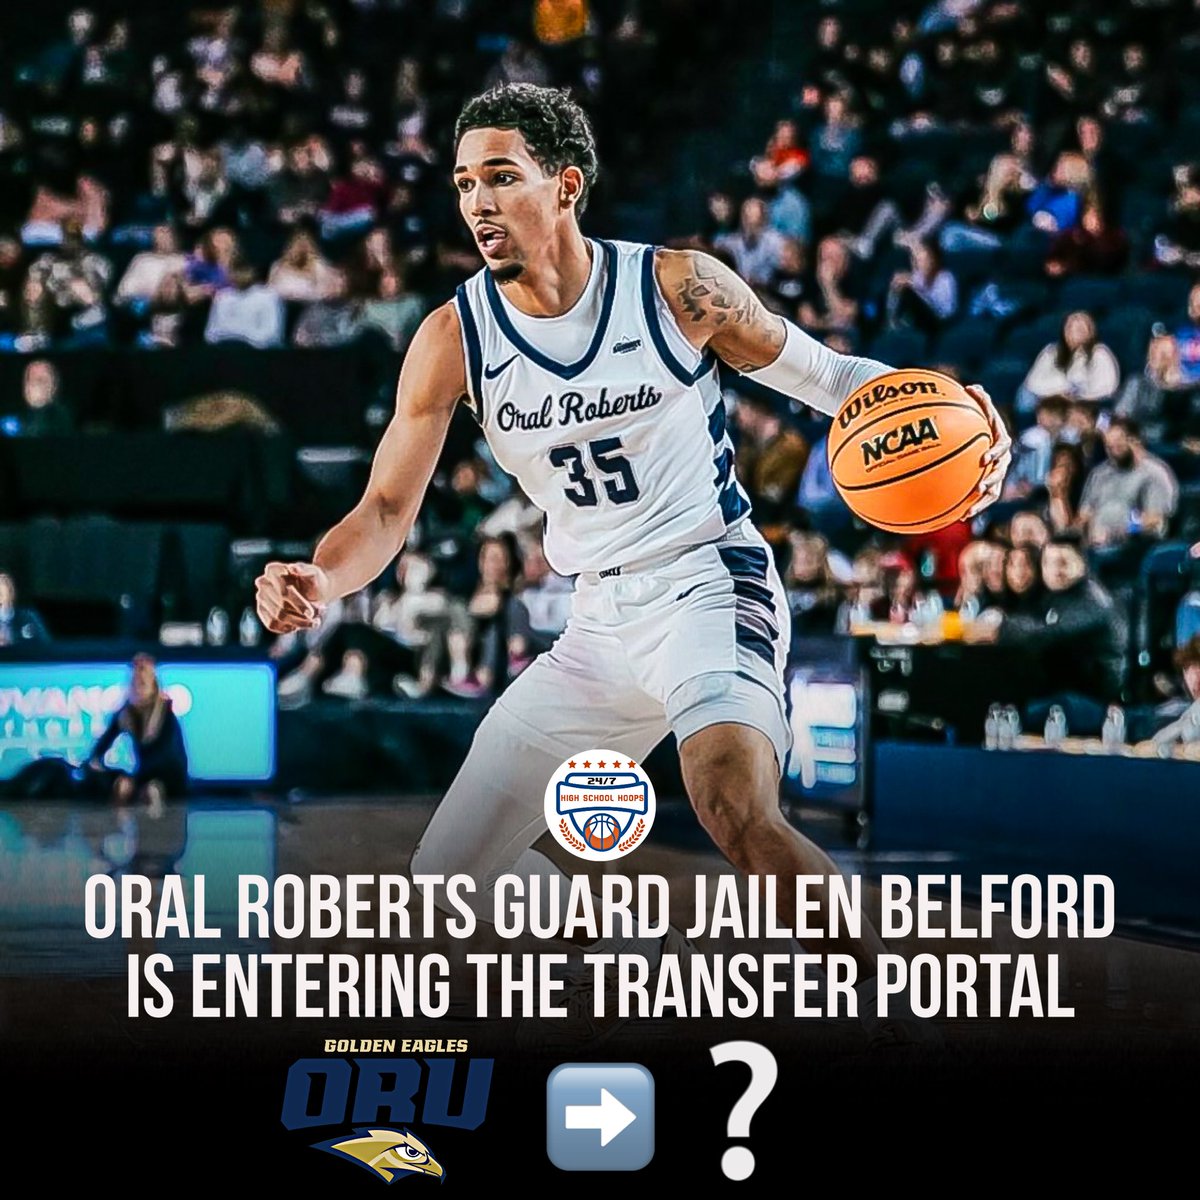 NEWS: Oral Roberts guard Jailen Bedford (@jailen_bedford) tells me he’s entering the transfer portal. Bedford began his career at Trinidad State (JUCO) before arriving at Oral Roberts last summer. Was second on the team in scoring this season. He averaged 14.6PPG, 6.4RPG and…